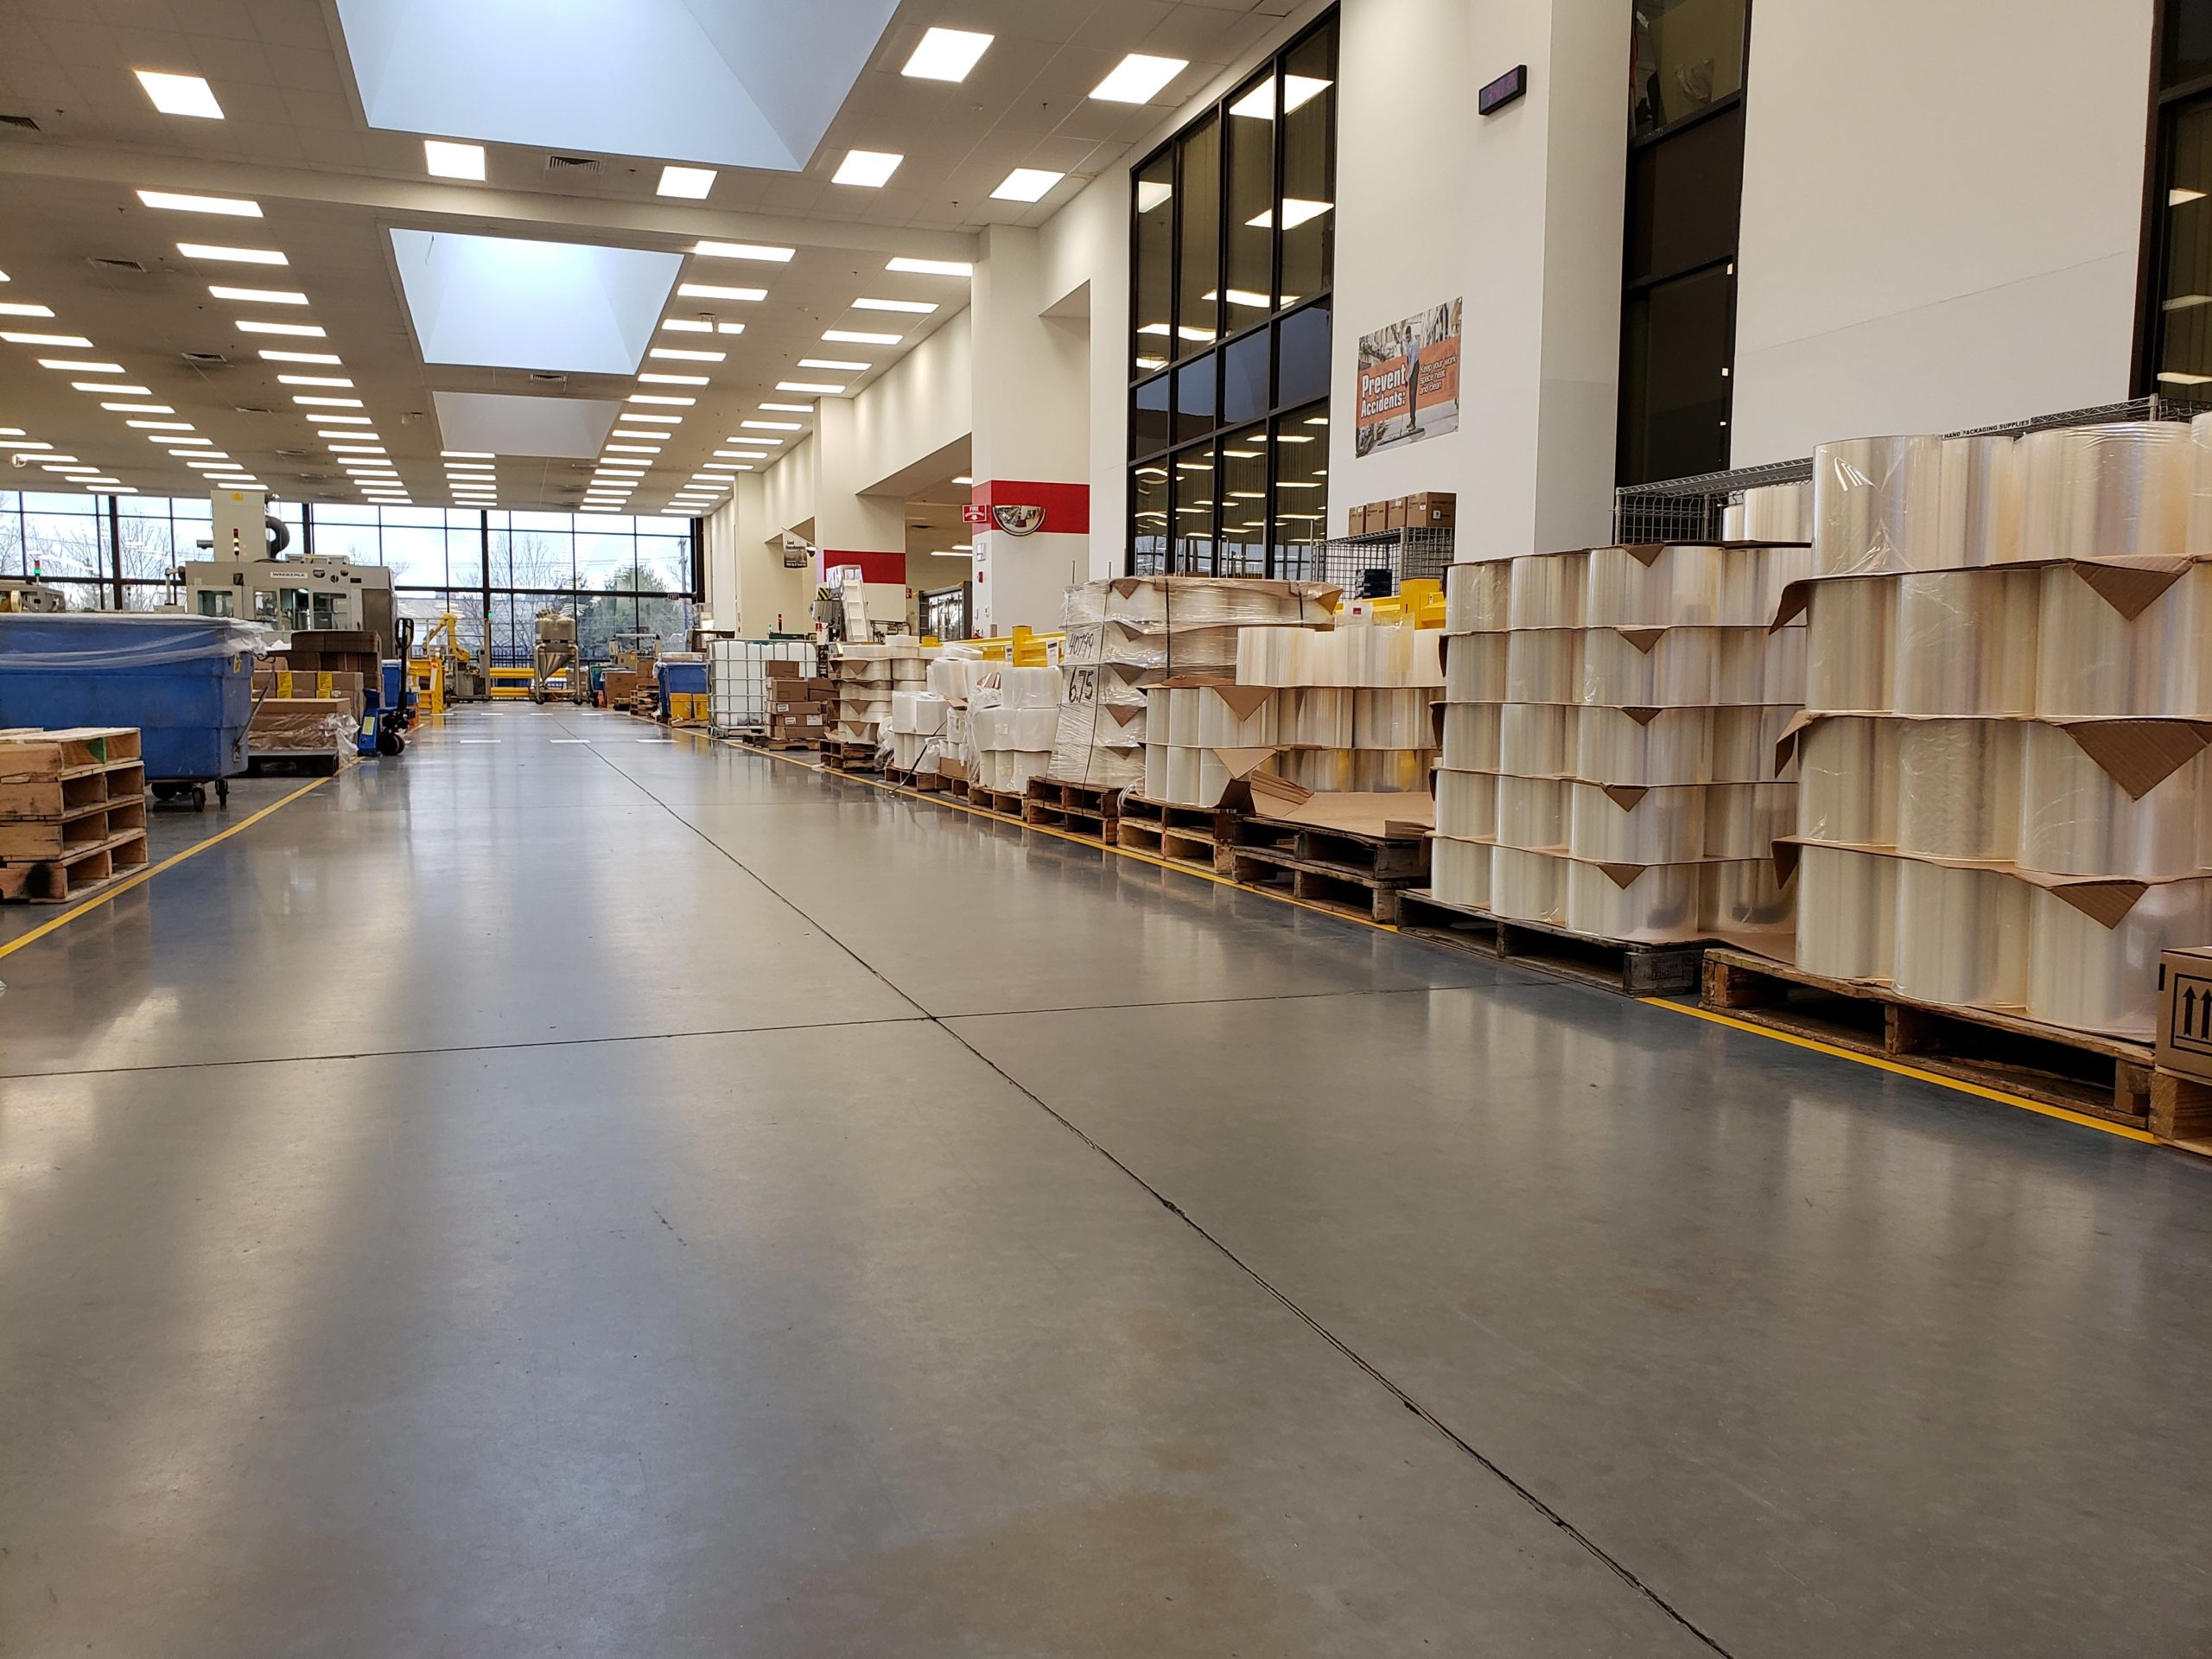 Industrial space with epoxy flooring Introducing Epoxy Floors 10 Things You Want to Know | Duraamen Engineered Products Inc